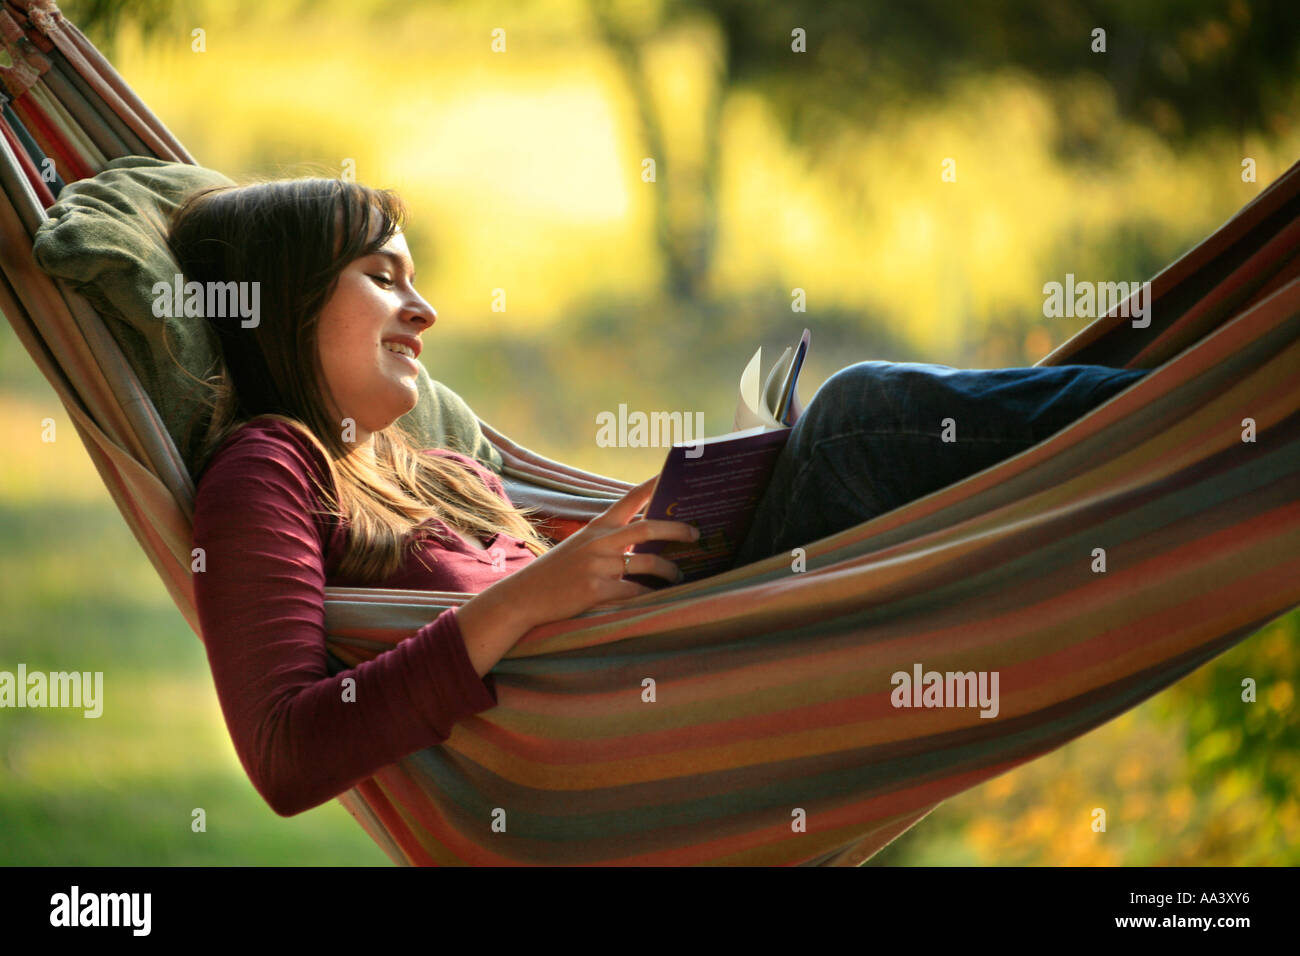 A young teen-aged girl reads a book in a hammock at sunset. Stock Photo